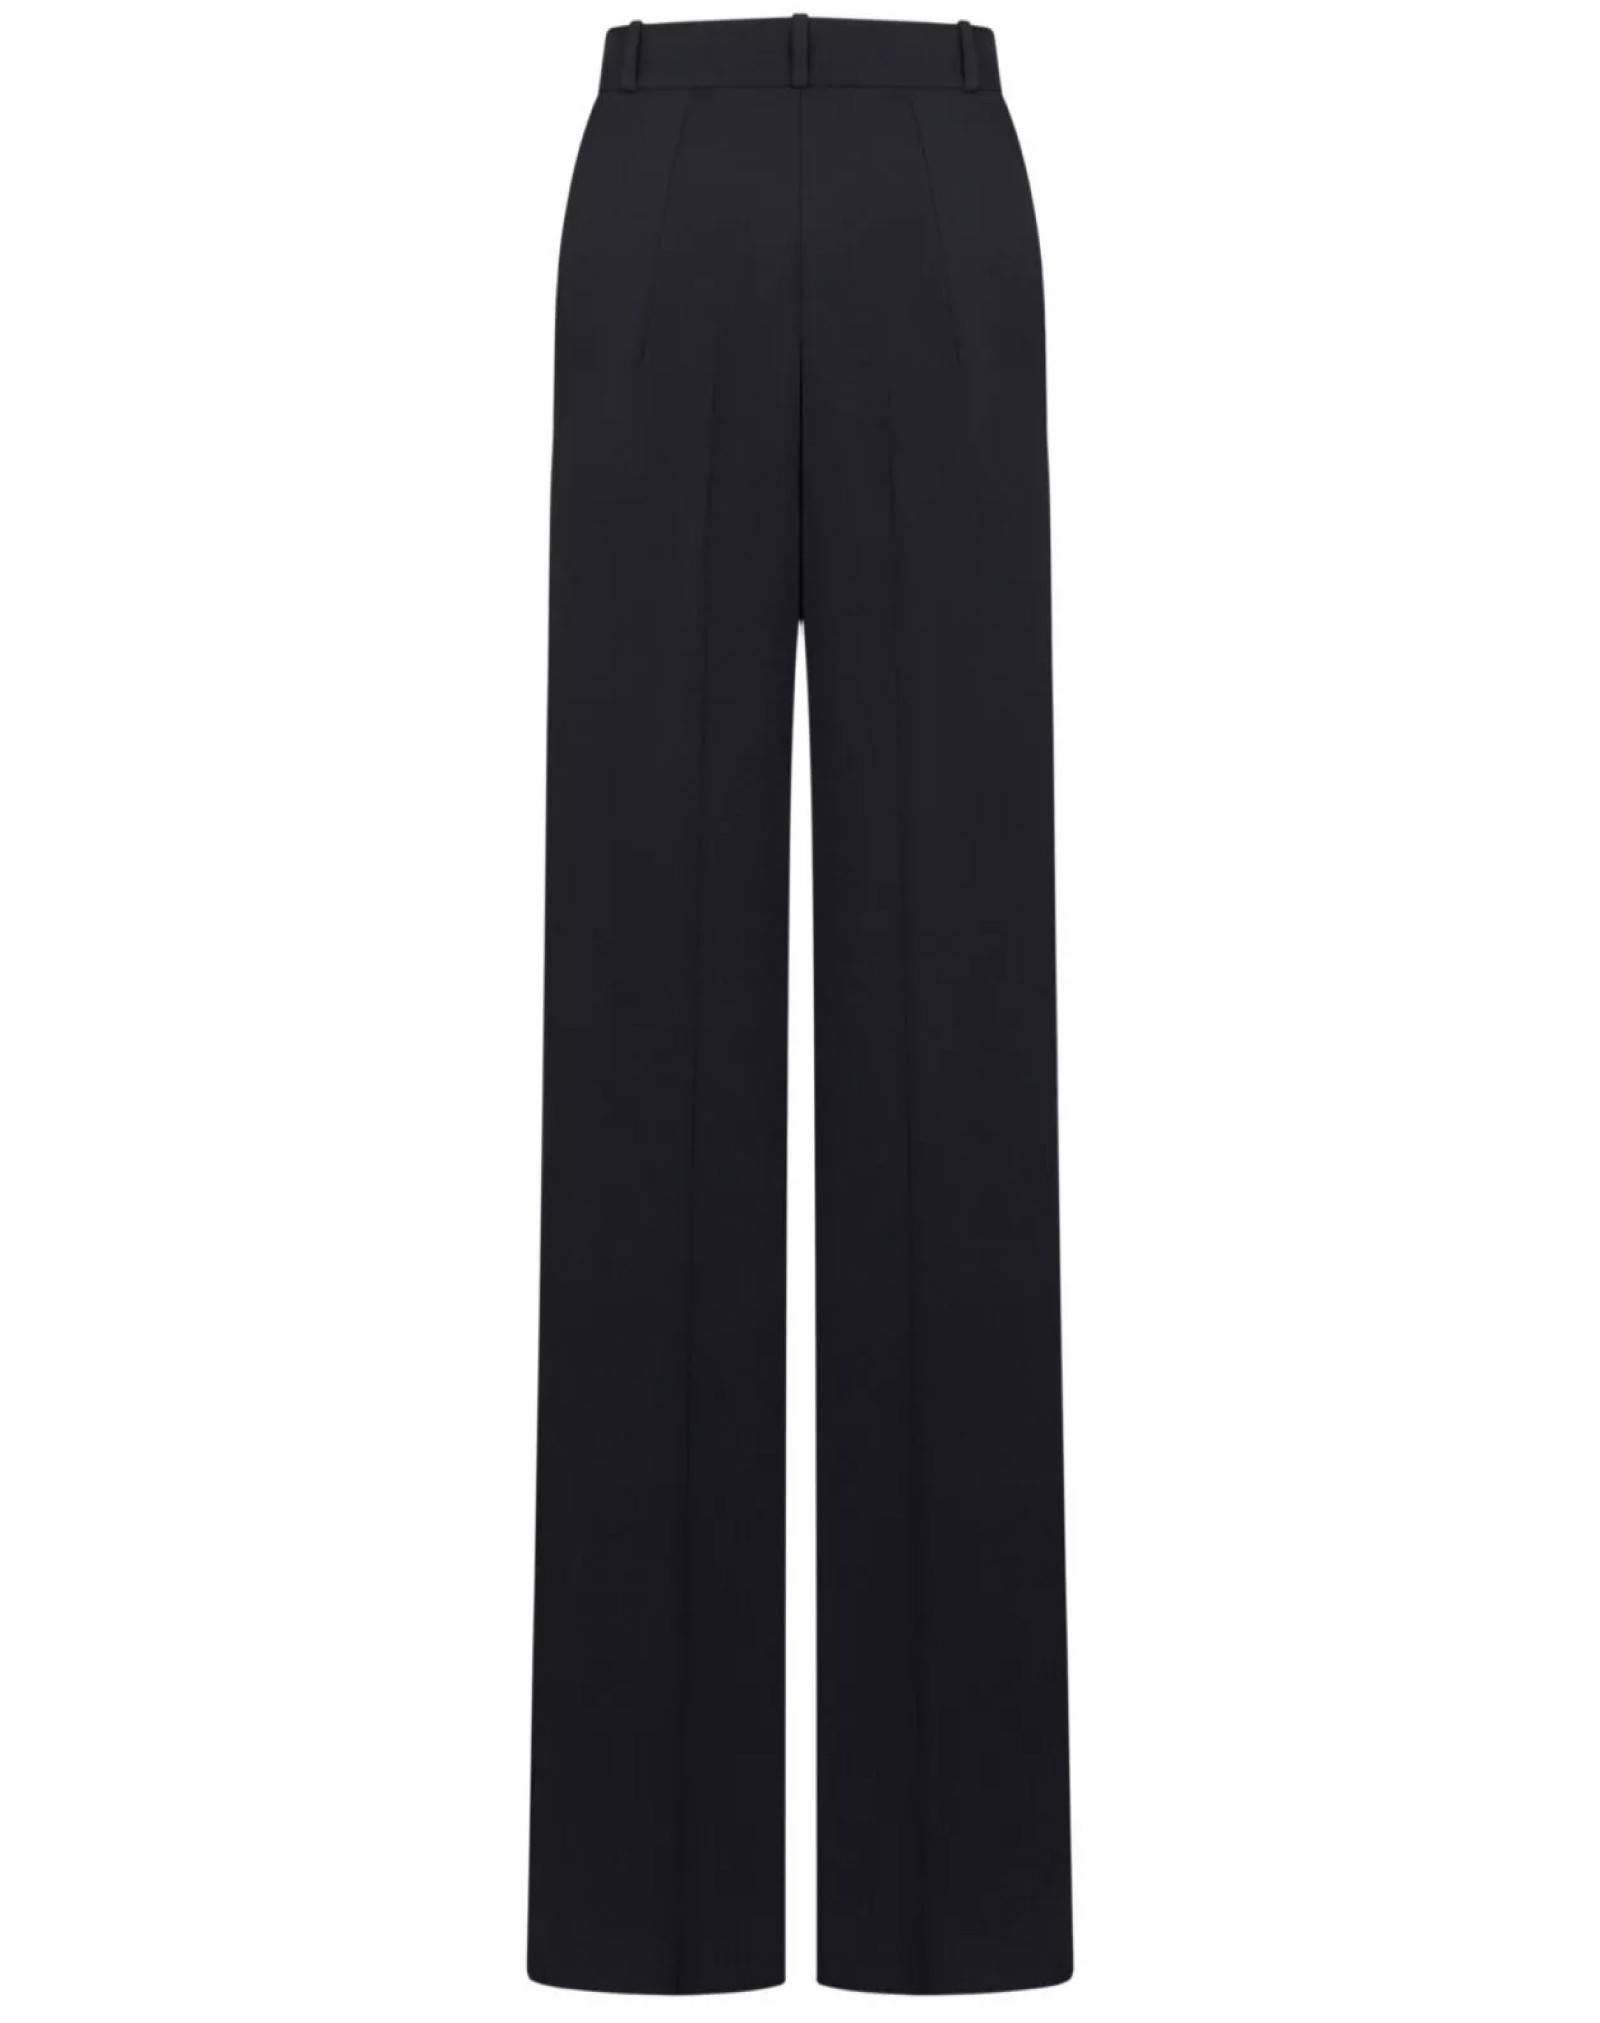 Black trousers with arrows